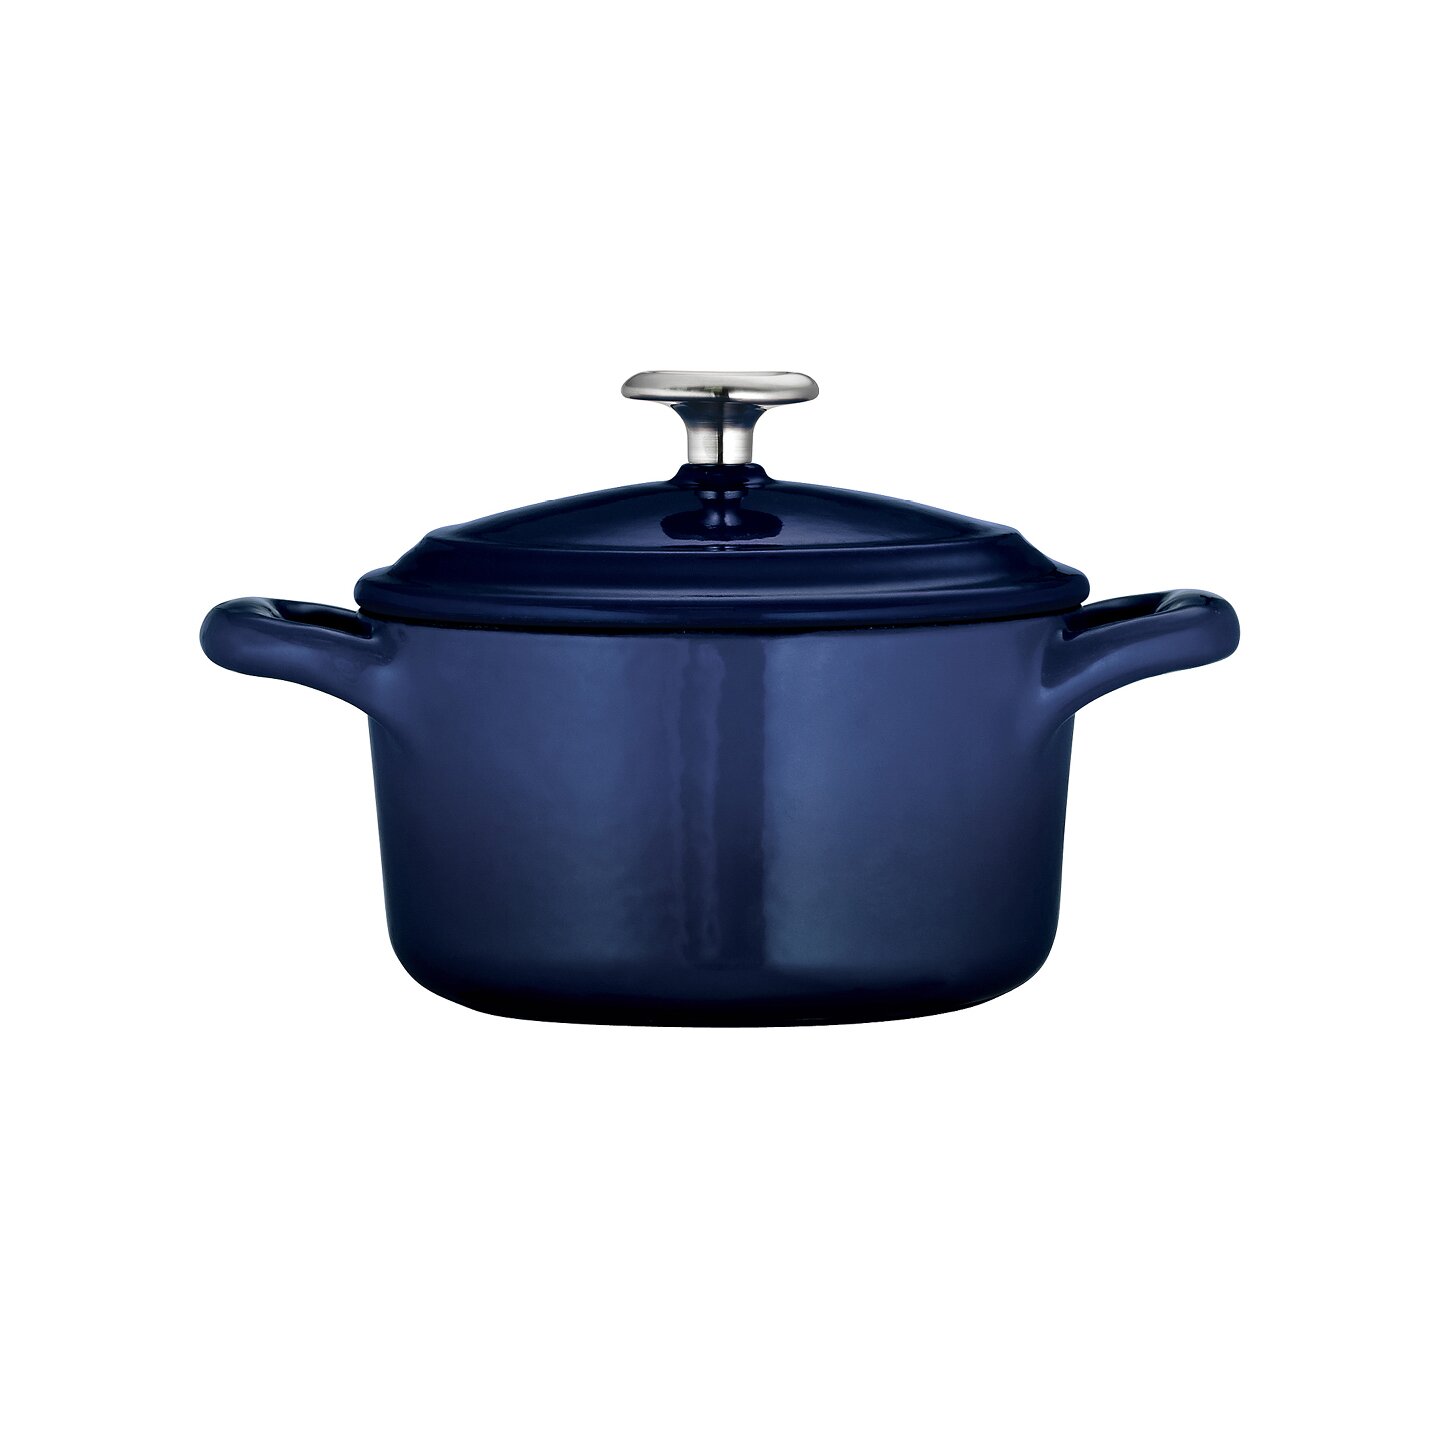 Gourmet Enameled Cast Iron Cocotte with Lid | Wayfair